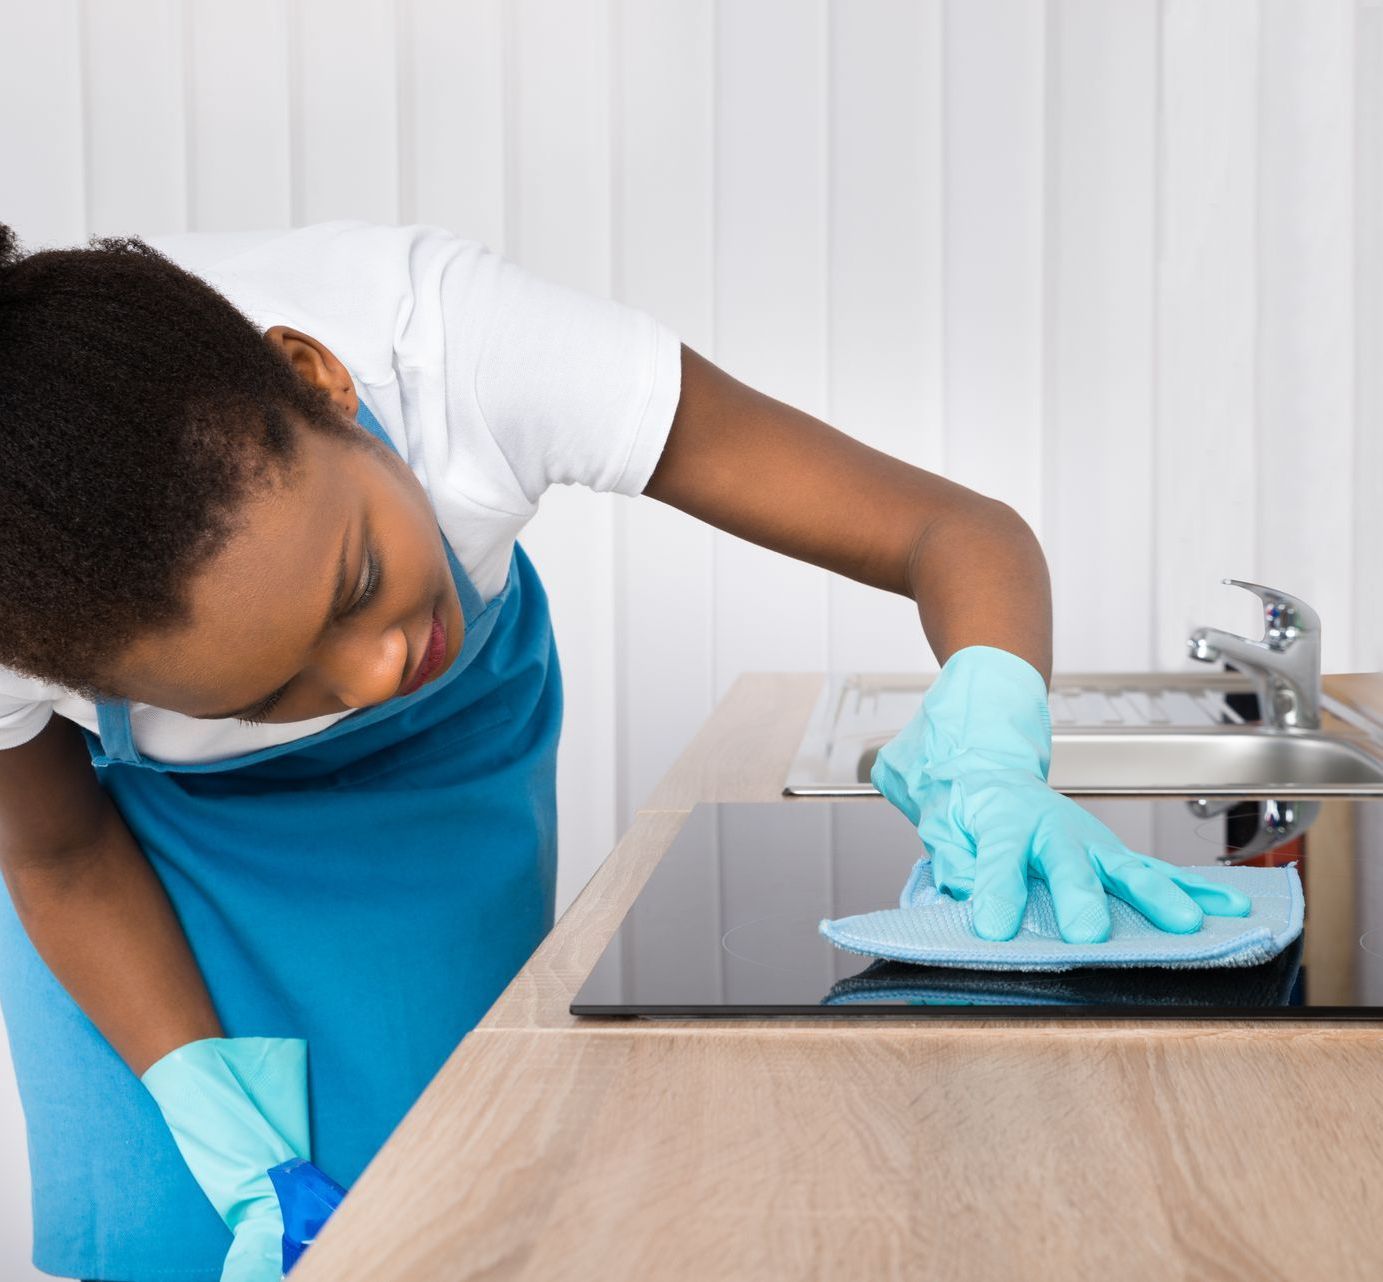 A woman wearing blue gloves is cleaning a sink